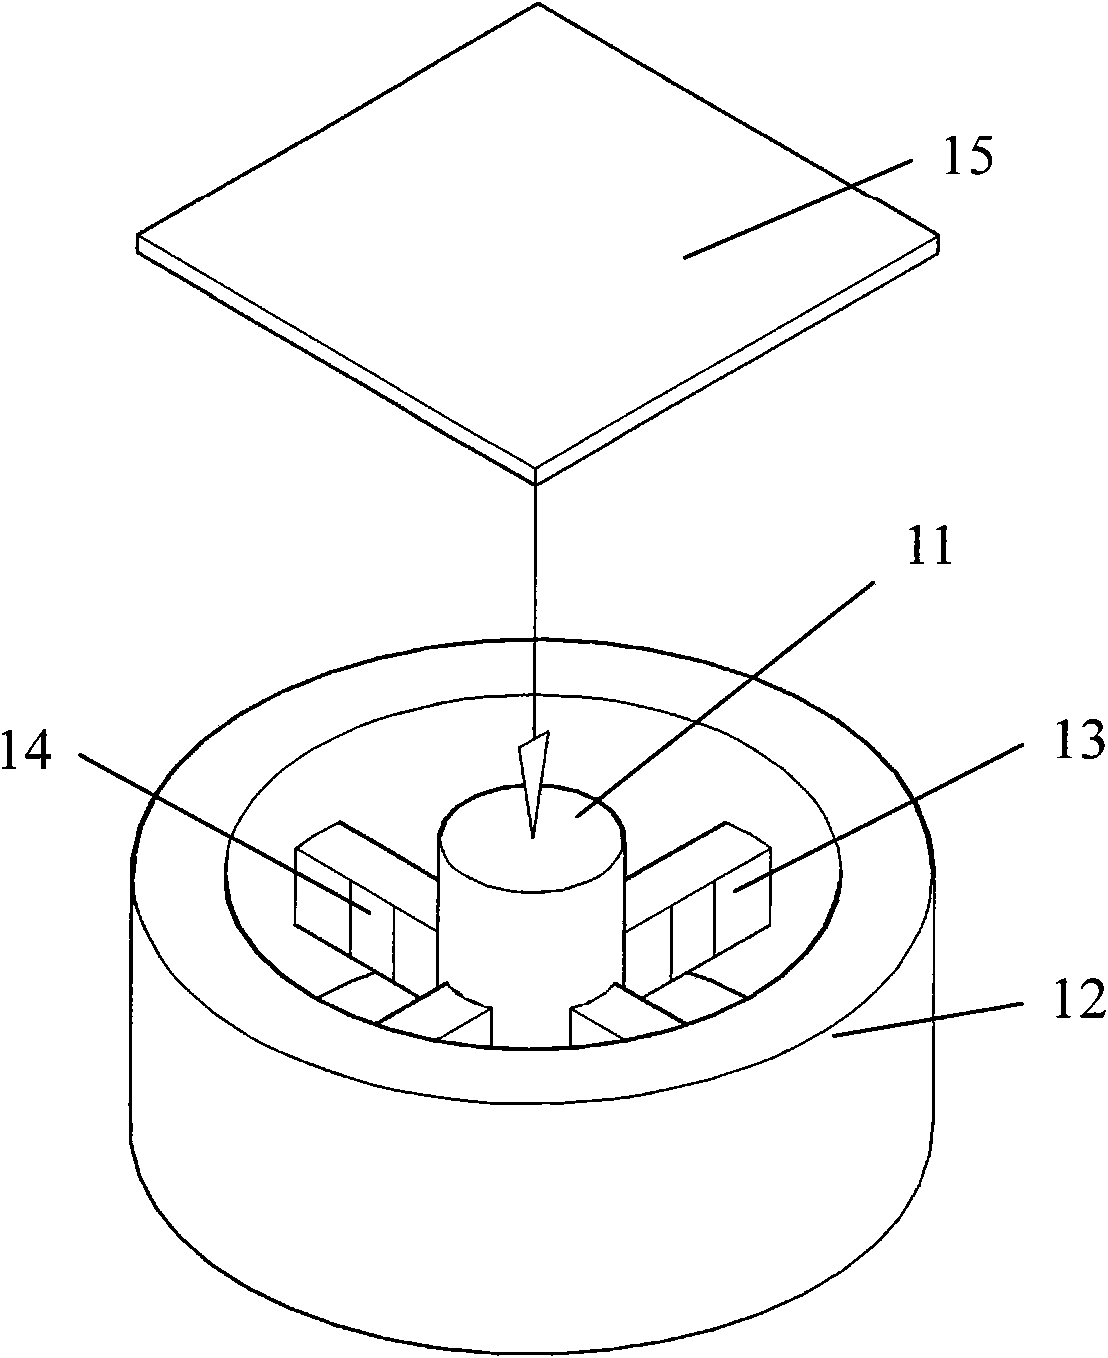 Method for monitoring axial force of scaffold upright rod